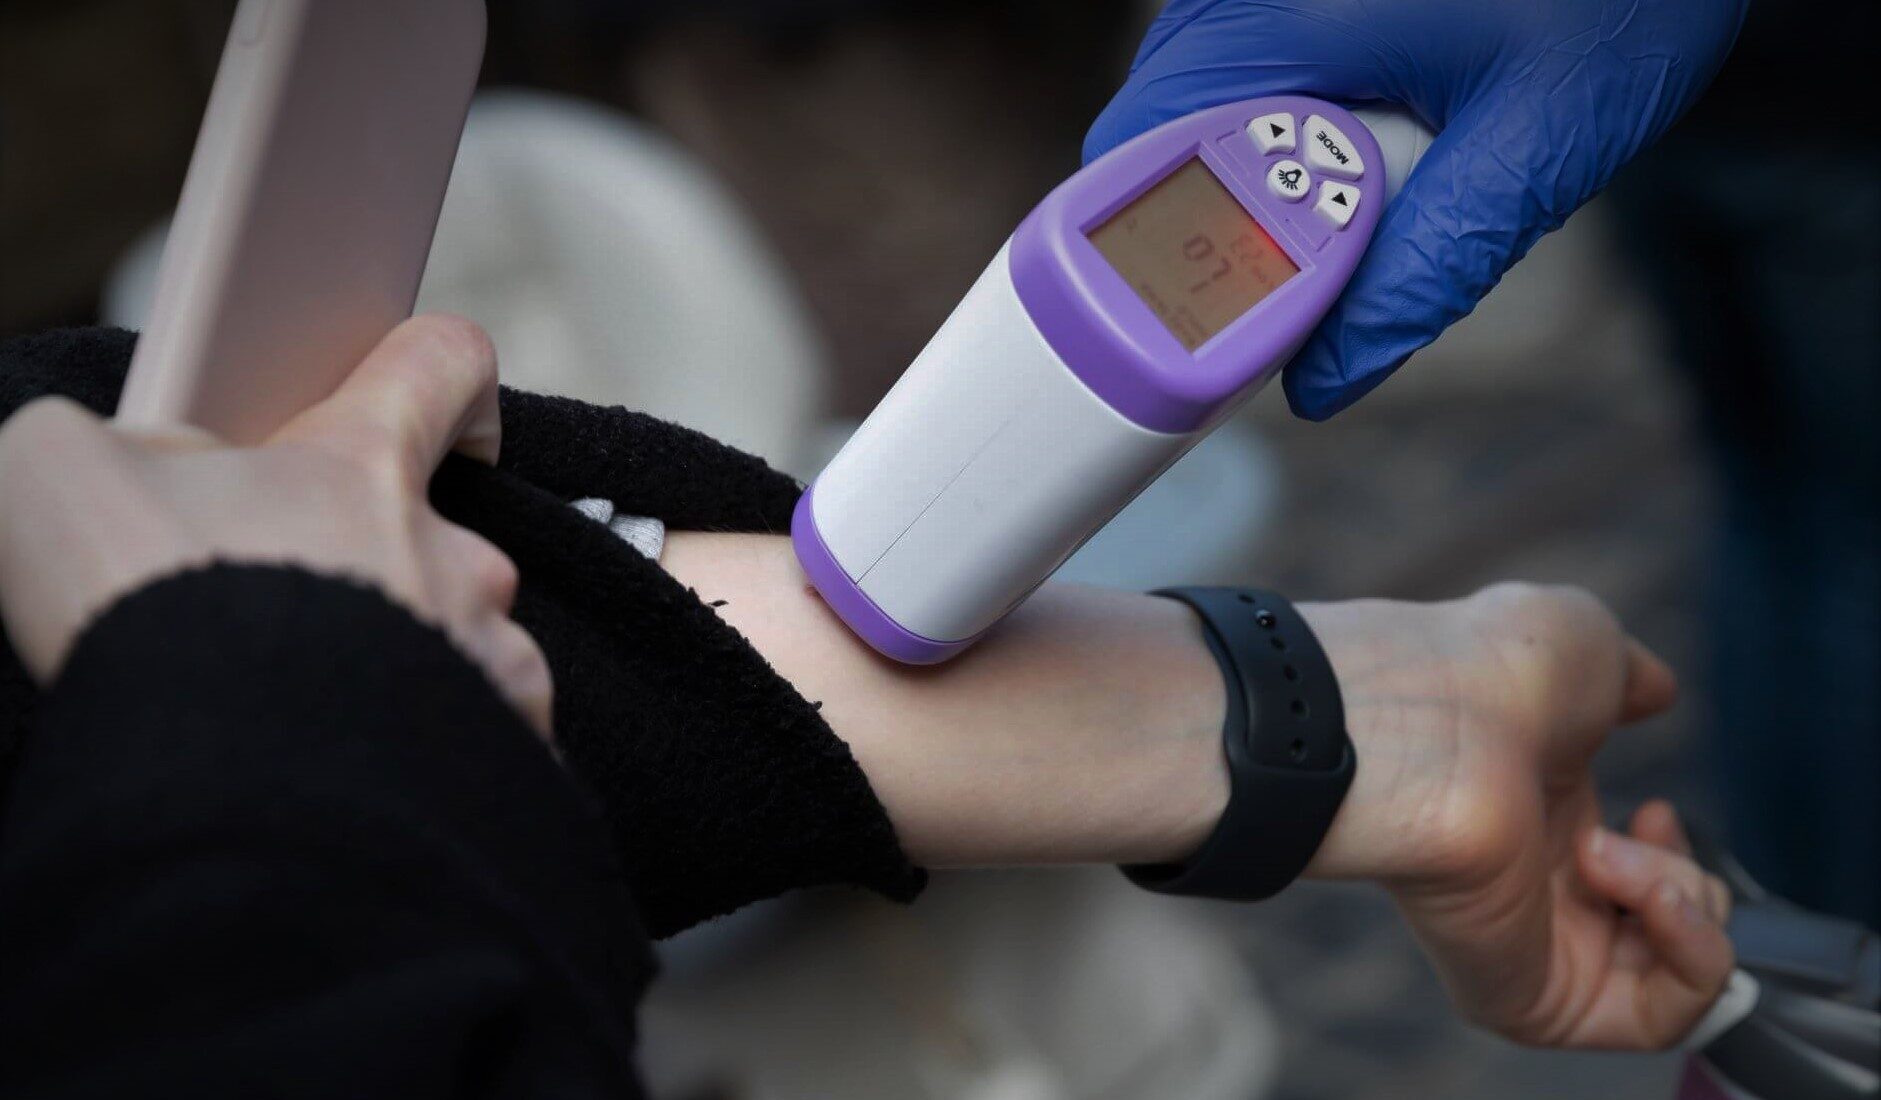 Patient Temperature Monitoring Market Size, Share, Growth & Trends 2026